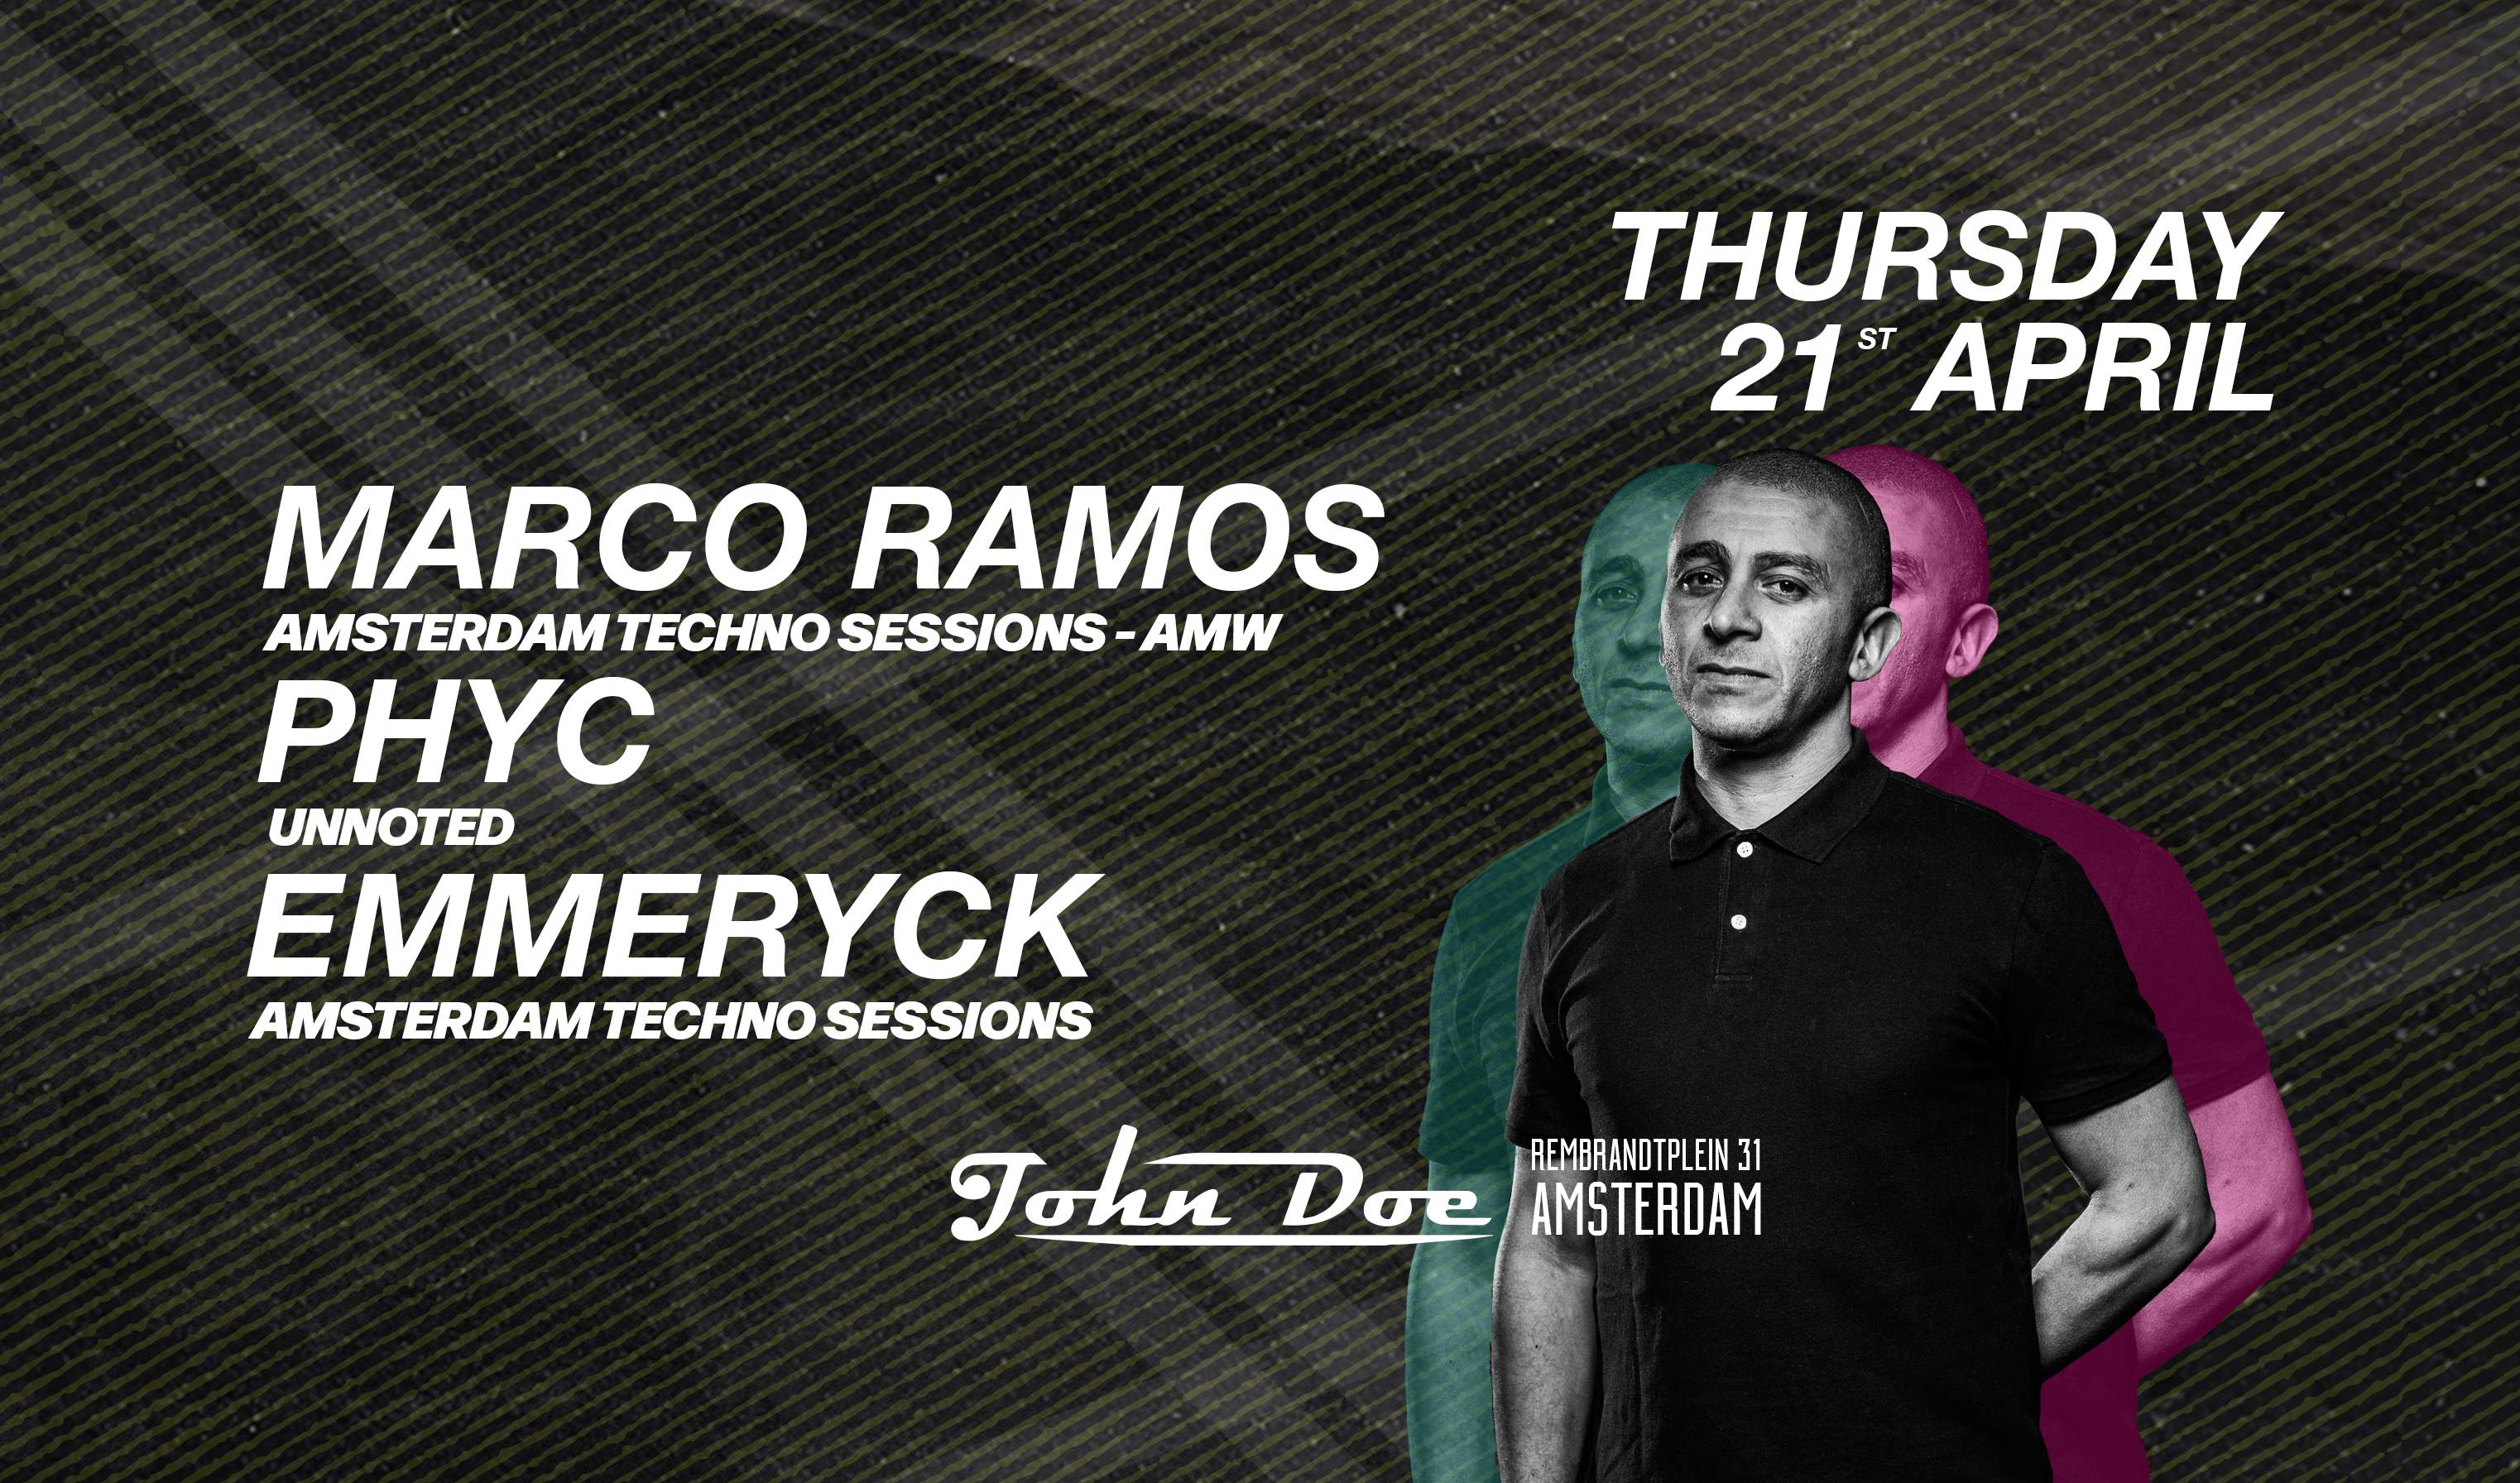 Amsterdam Techno Sessions with Marco Ramos, PHYC & Emmeryck - フライヤー表